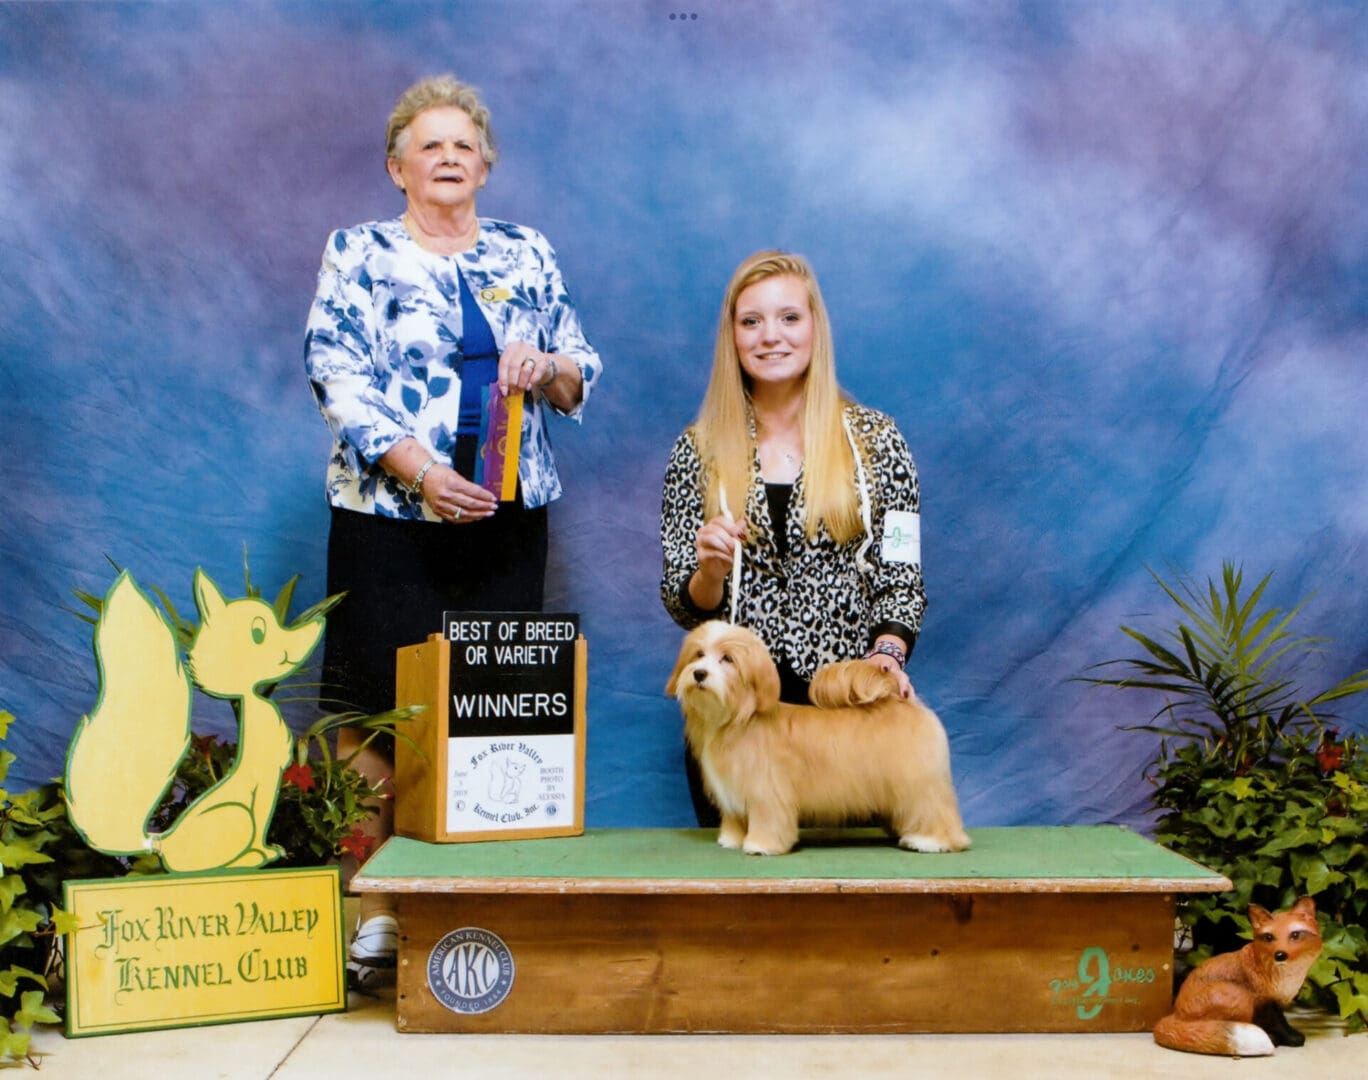 Two women posing with their Havanese show dogs at a dog show in Chicago, IL.